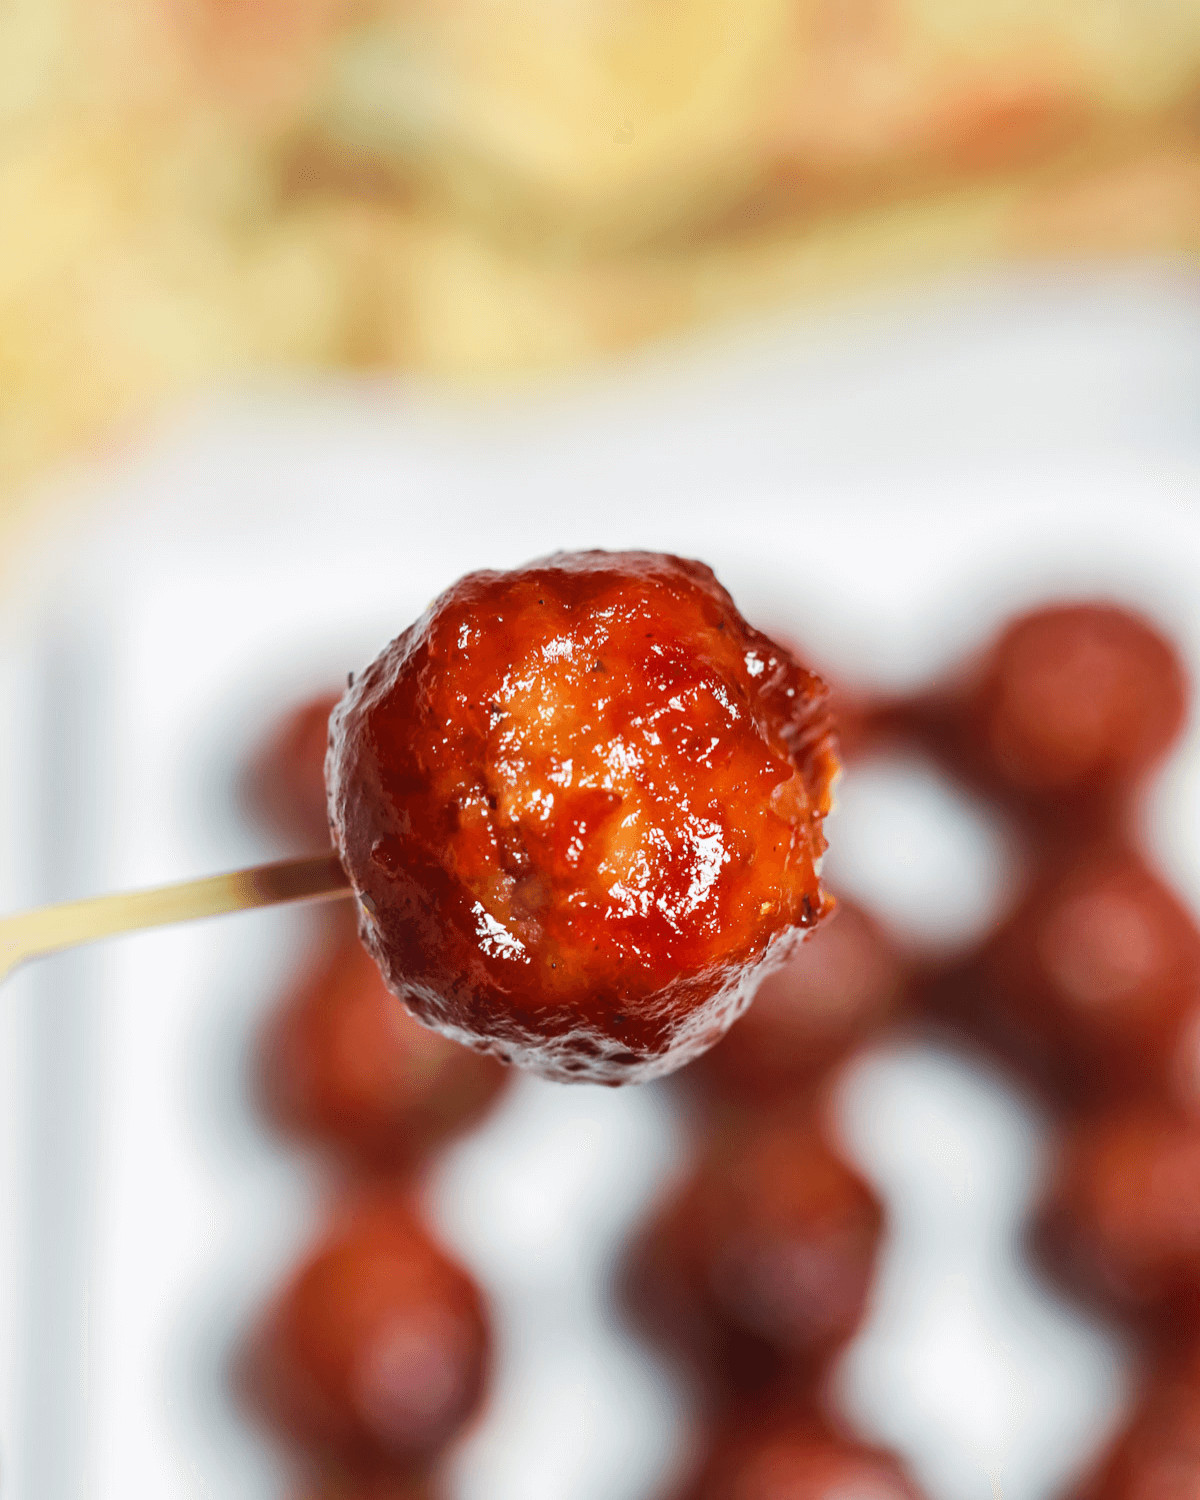 A close-up of a sweet and spicy meatball on a toothpick, with more meatballs in the background.